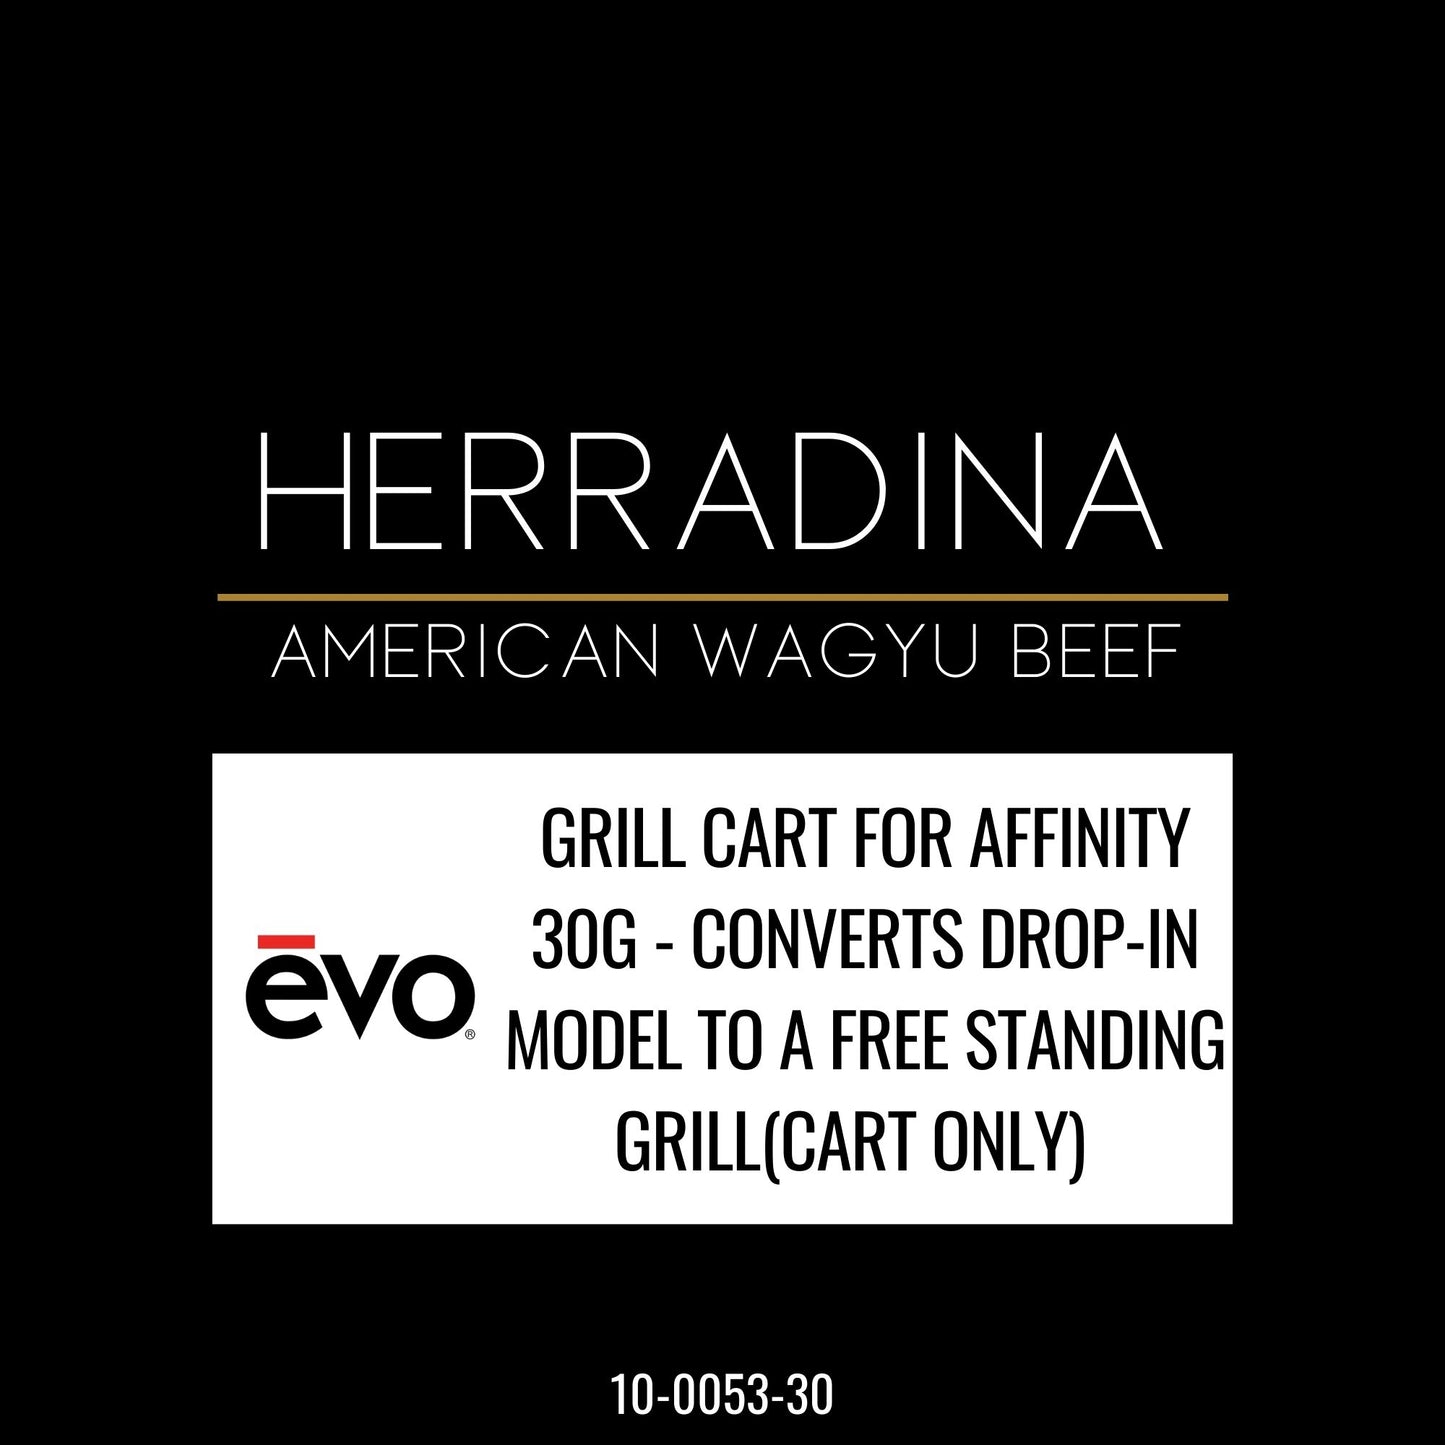 EVO GRILL CART FOR AFFINITY 30G - CONVERTS DROP-IN MODEL TO A FREE STANDING GRILL(CART ONLY)